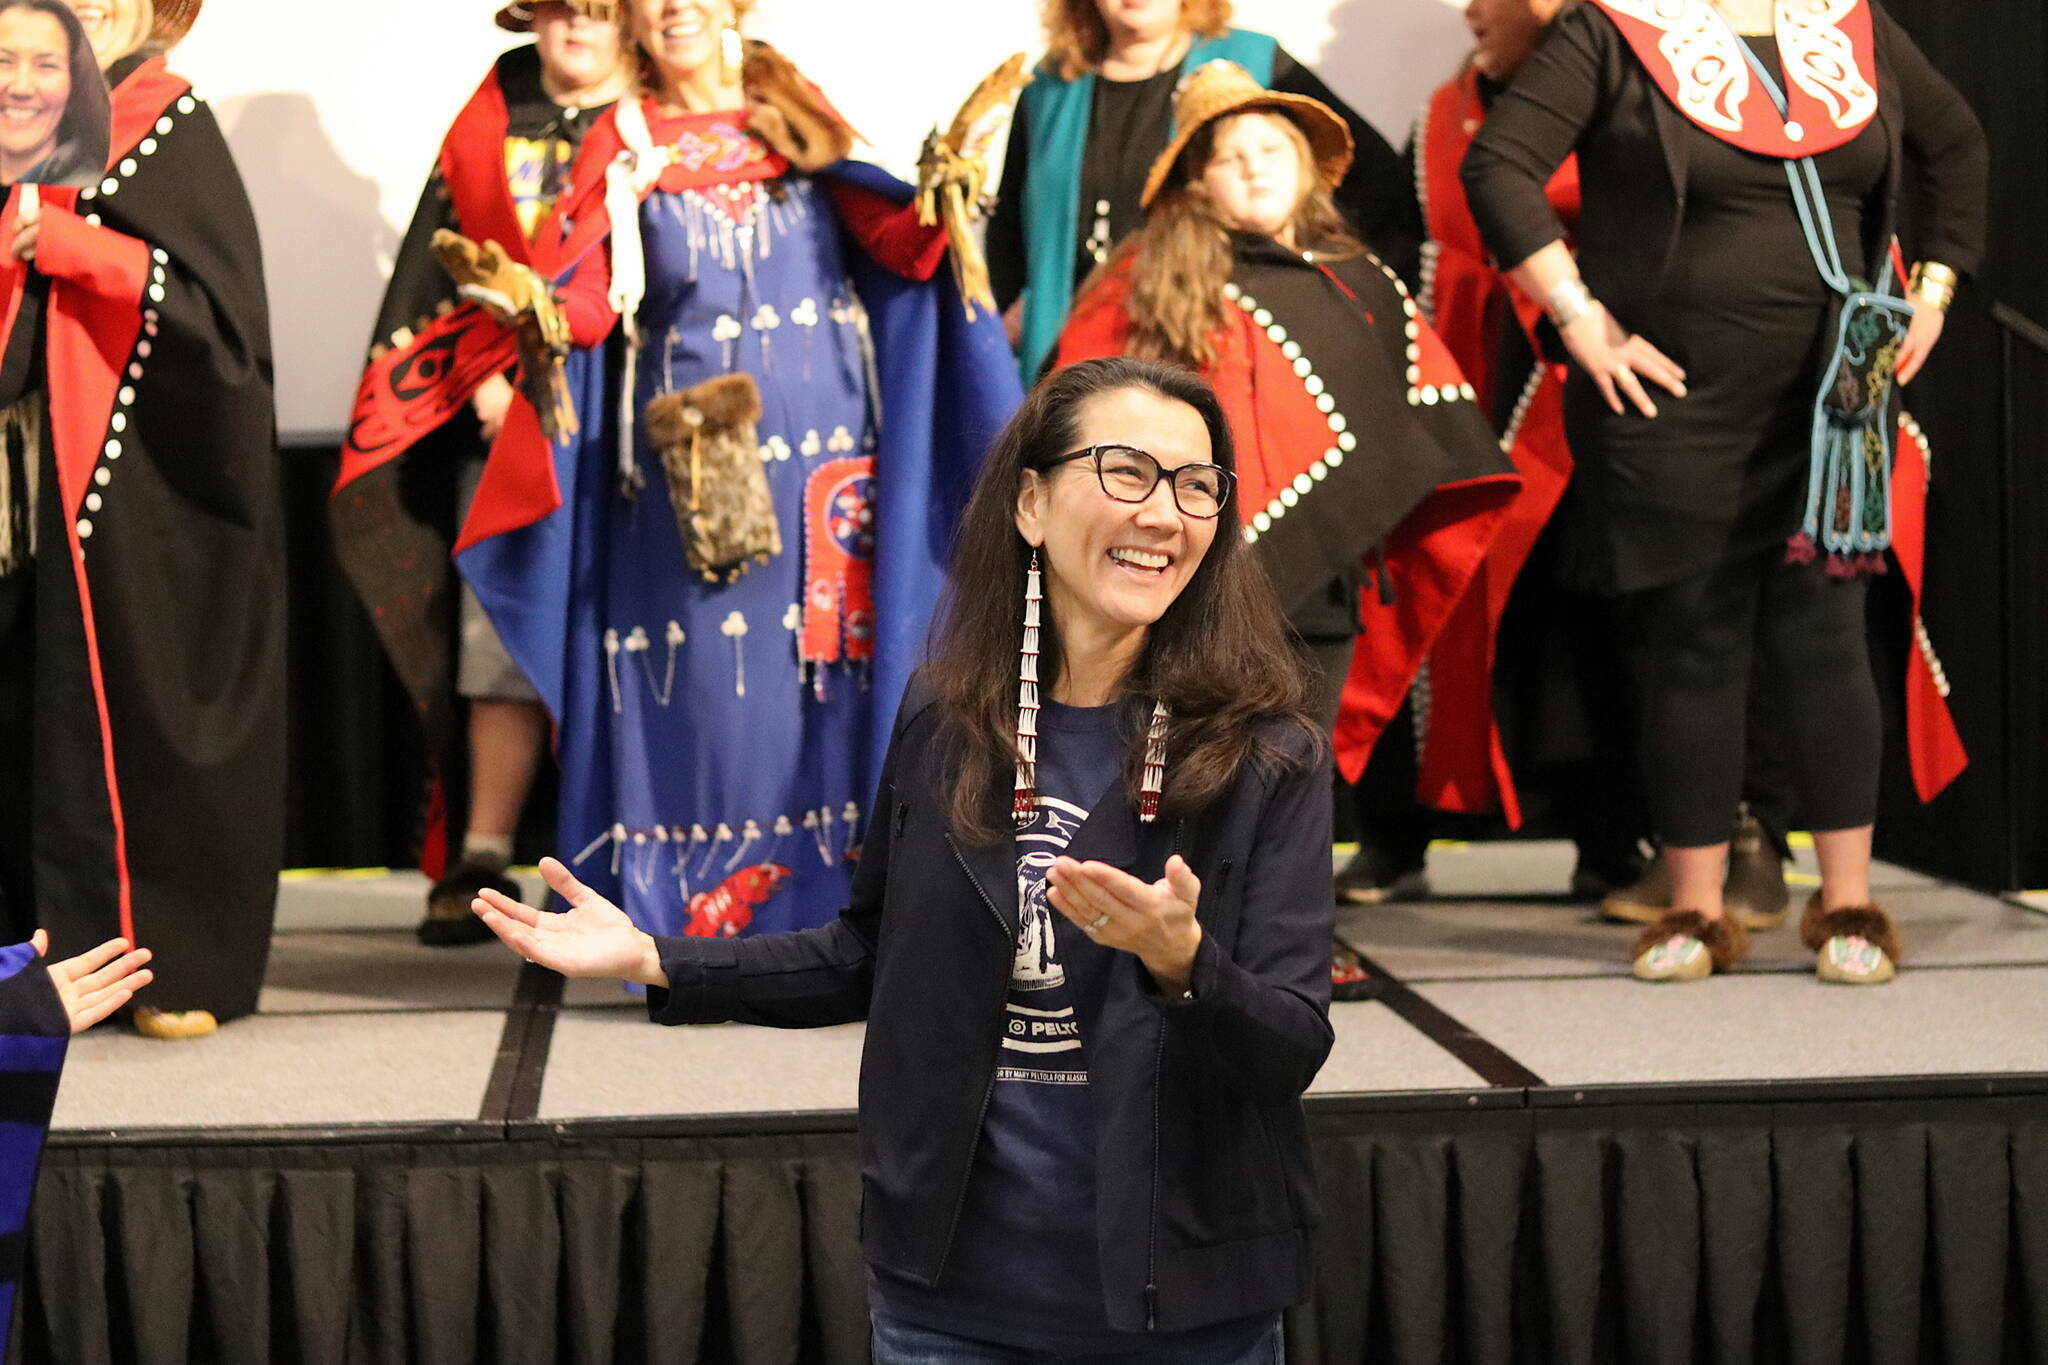 U.S. Rep. Mary Peltola, D-Alaska, dances with others during a campaign event Oct. 24, 2022, at Elizabeth Peratrovich Hall. Peltola, who announced Monday she is seeking a second full term, is scheduled to make a campaign stop in Juneau on Friday. (Mark Sabbatini / Juneau Empire)